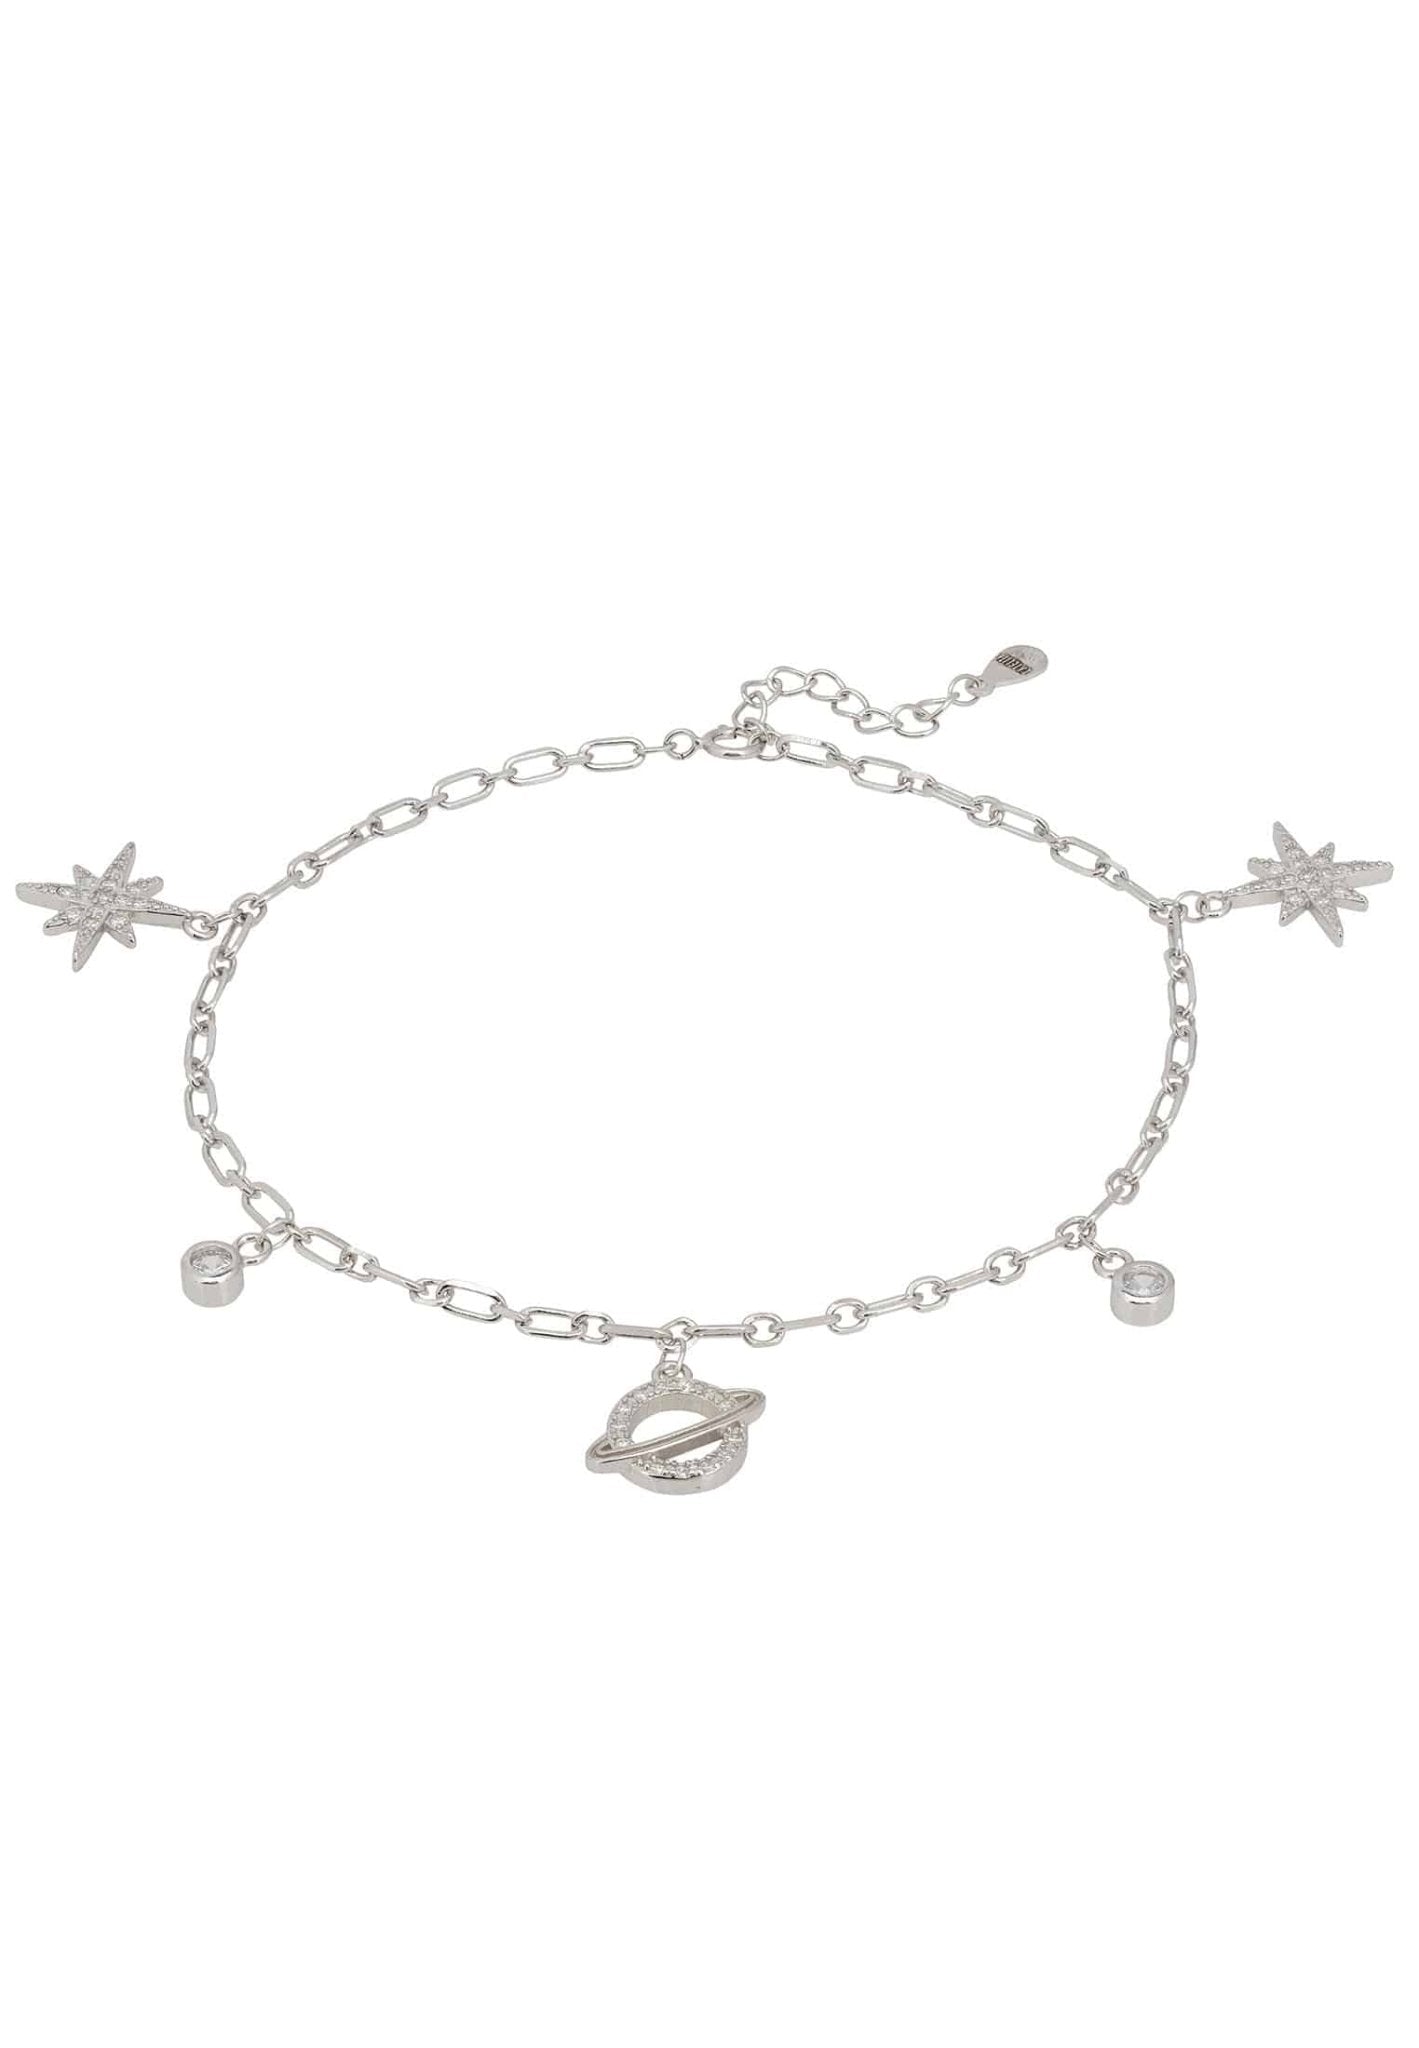 Galactic Anklet Silver - LATELITA Anklet